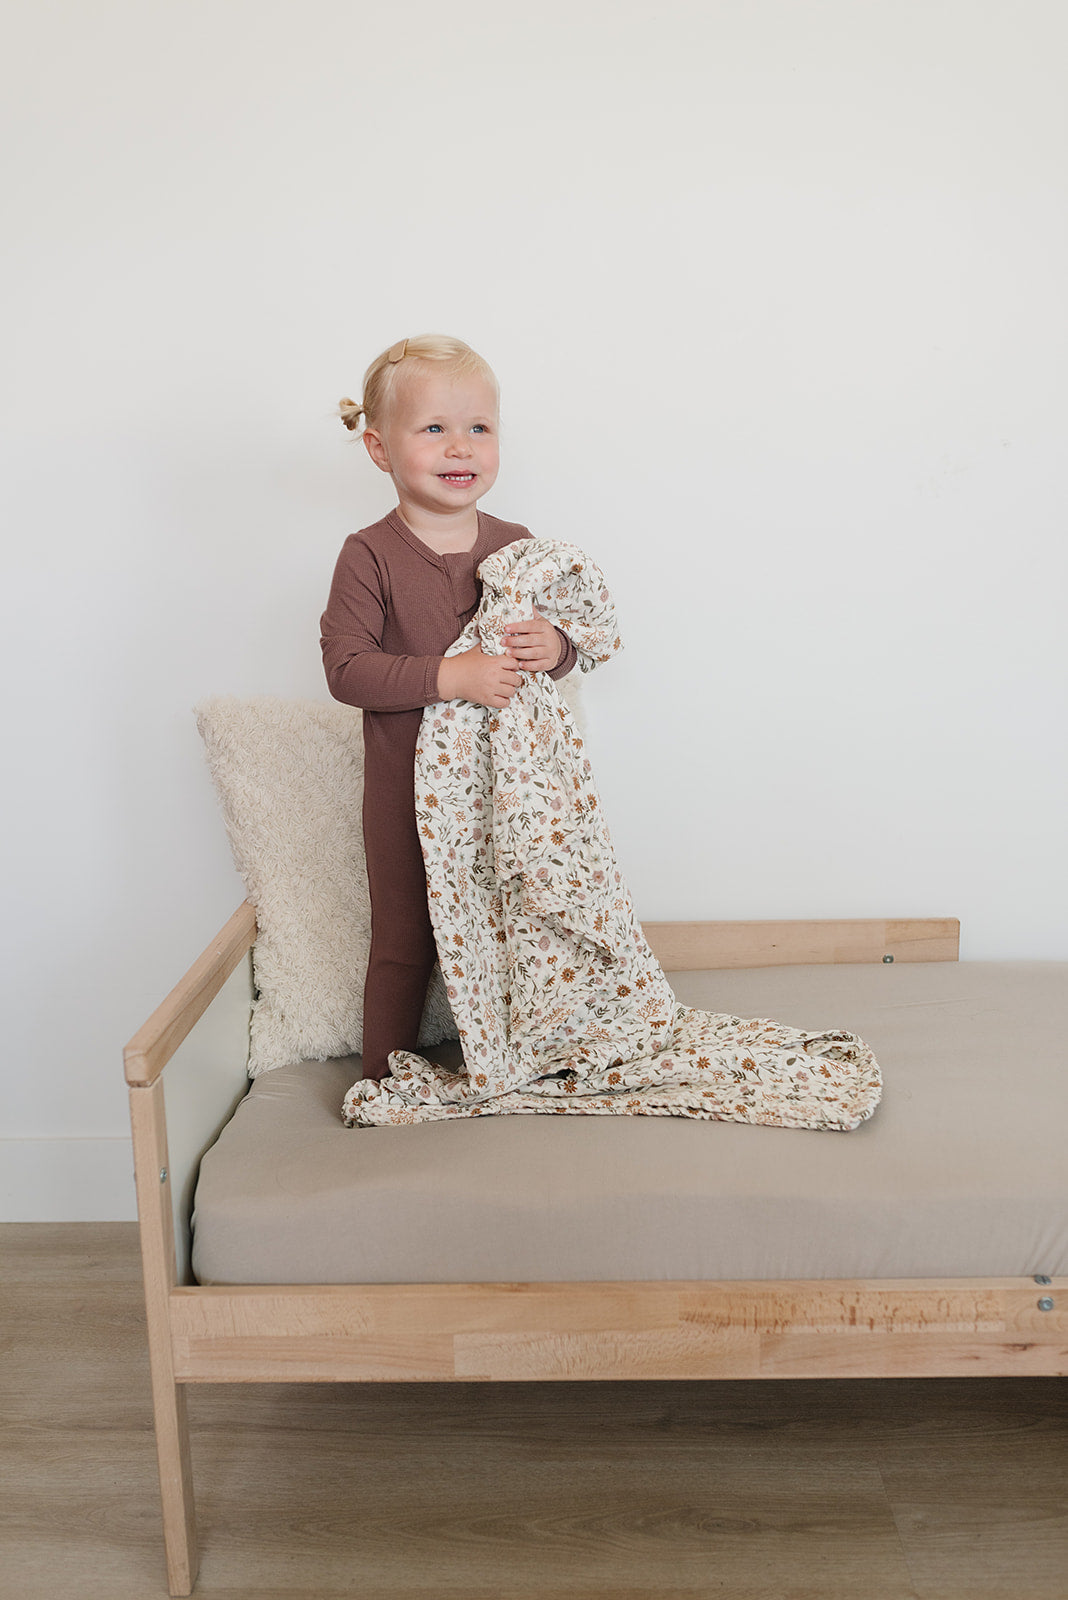 Mebie Baby Gender Neutral Infant Muslin quilt its 100% cotton. Looks great in any nursery. 